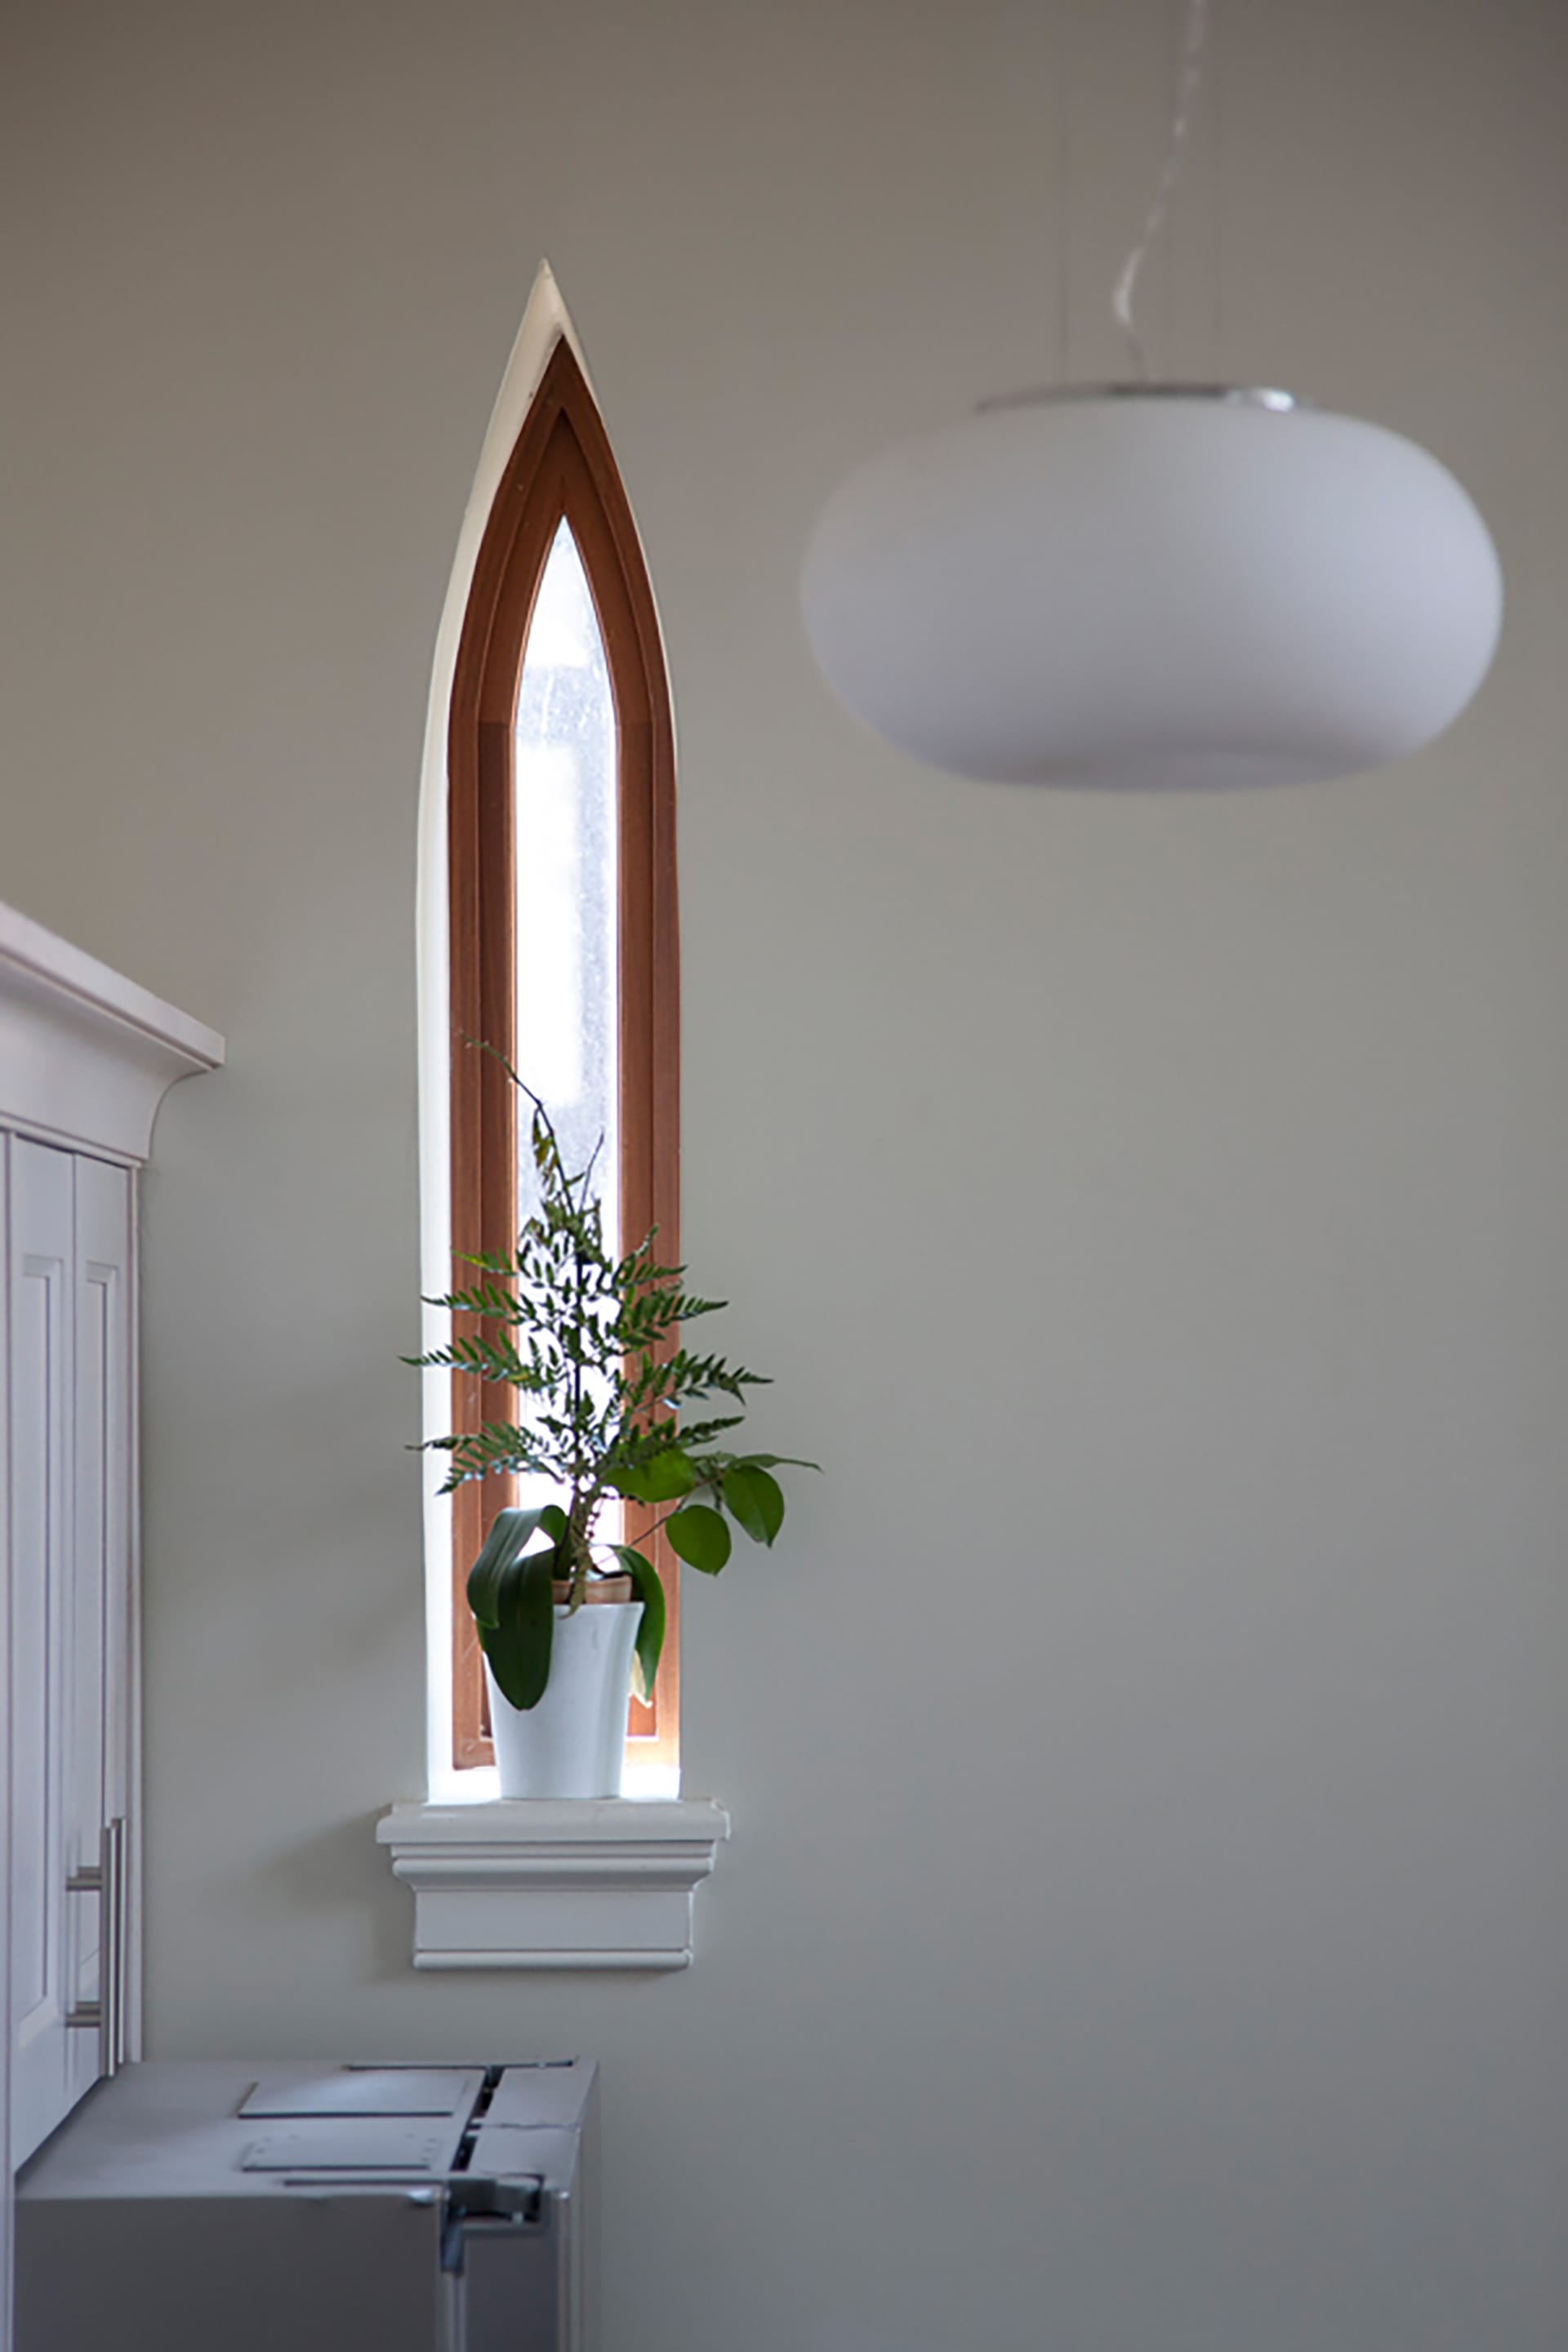 Pointed, narrow window with a houseplant on the window sill